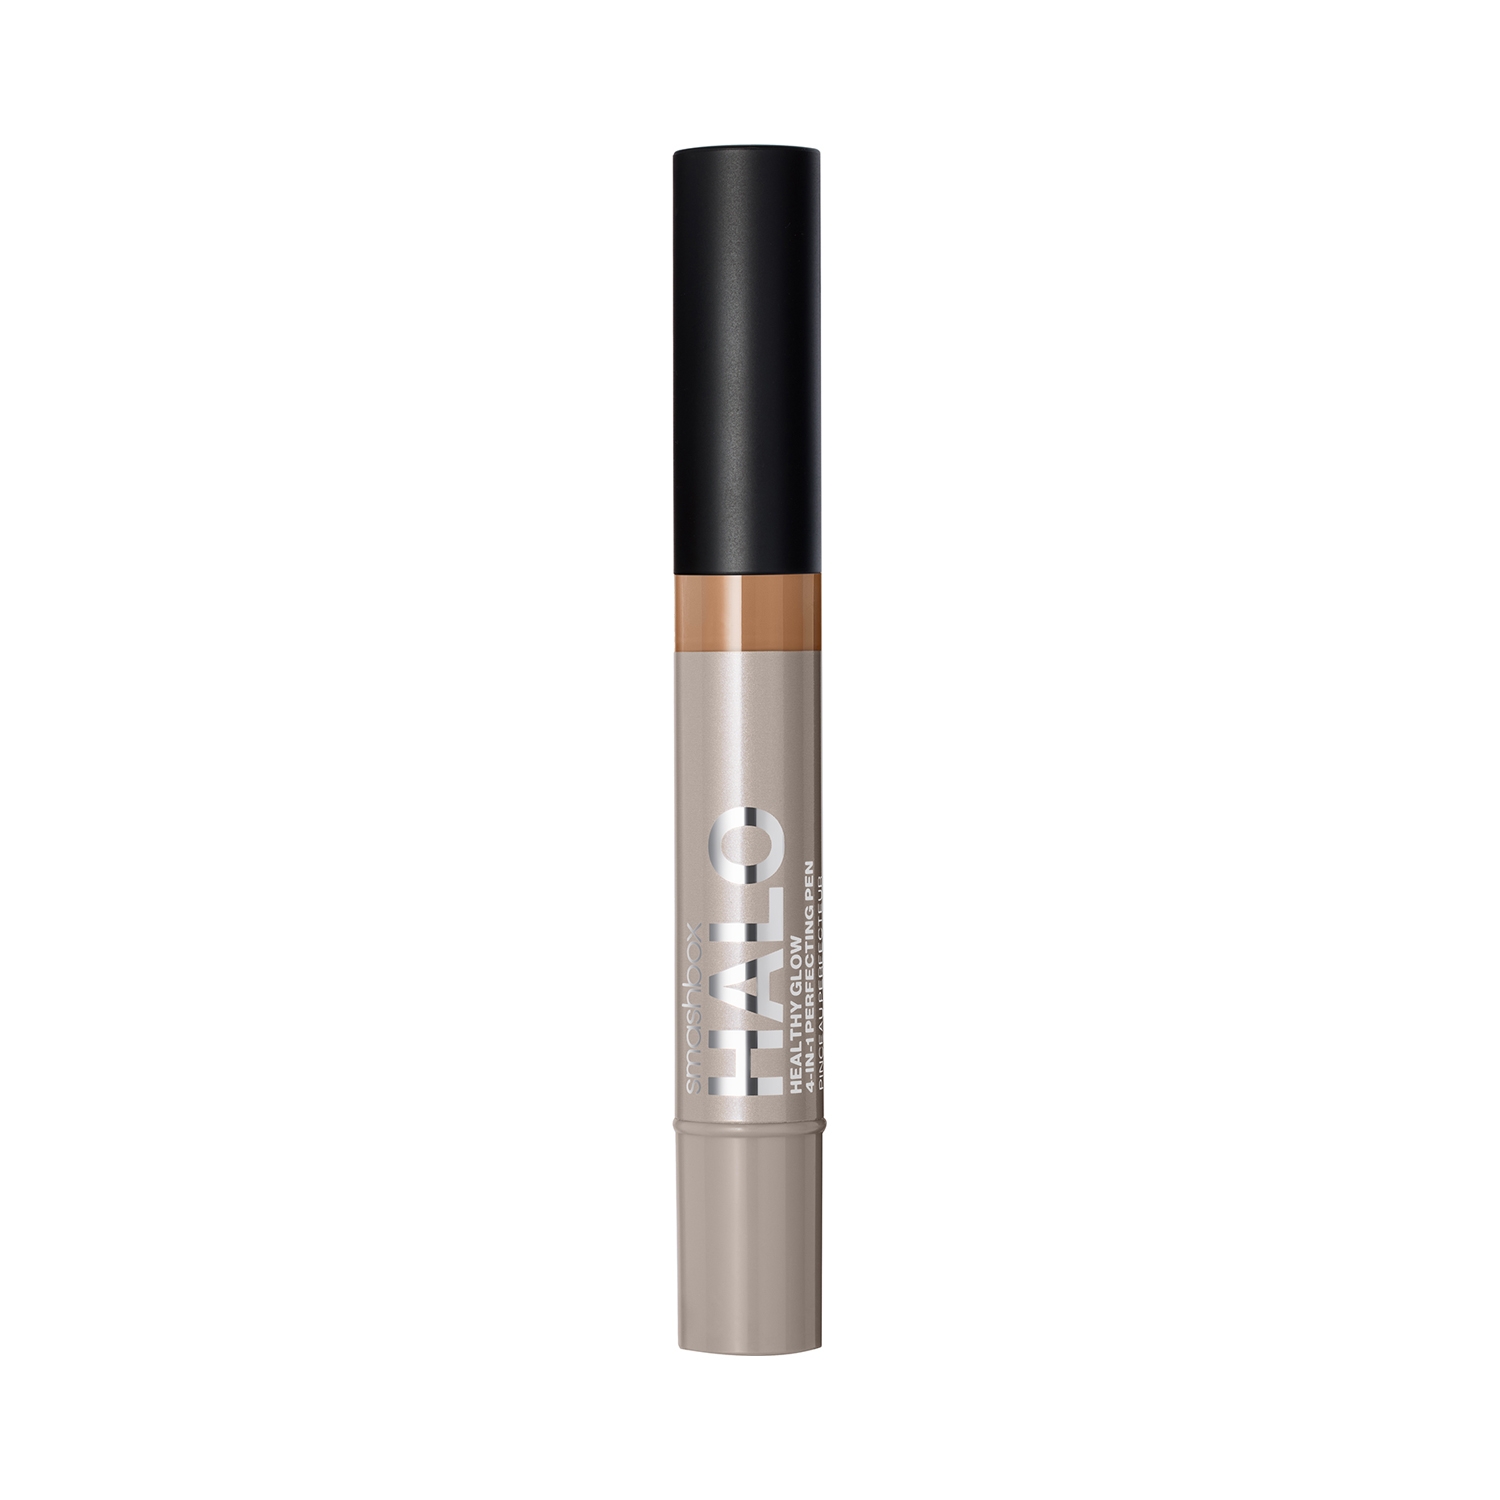 Smashbox | Smashbox Halo Healthy Glow 4-In-1 Perfecting Concealer Pen - M10N (3.5ml)